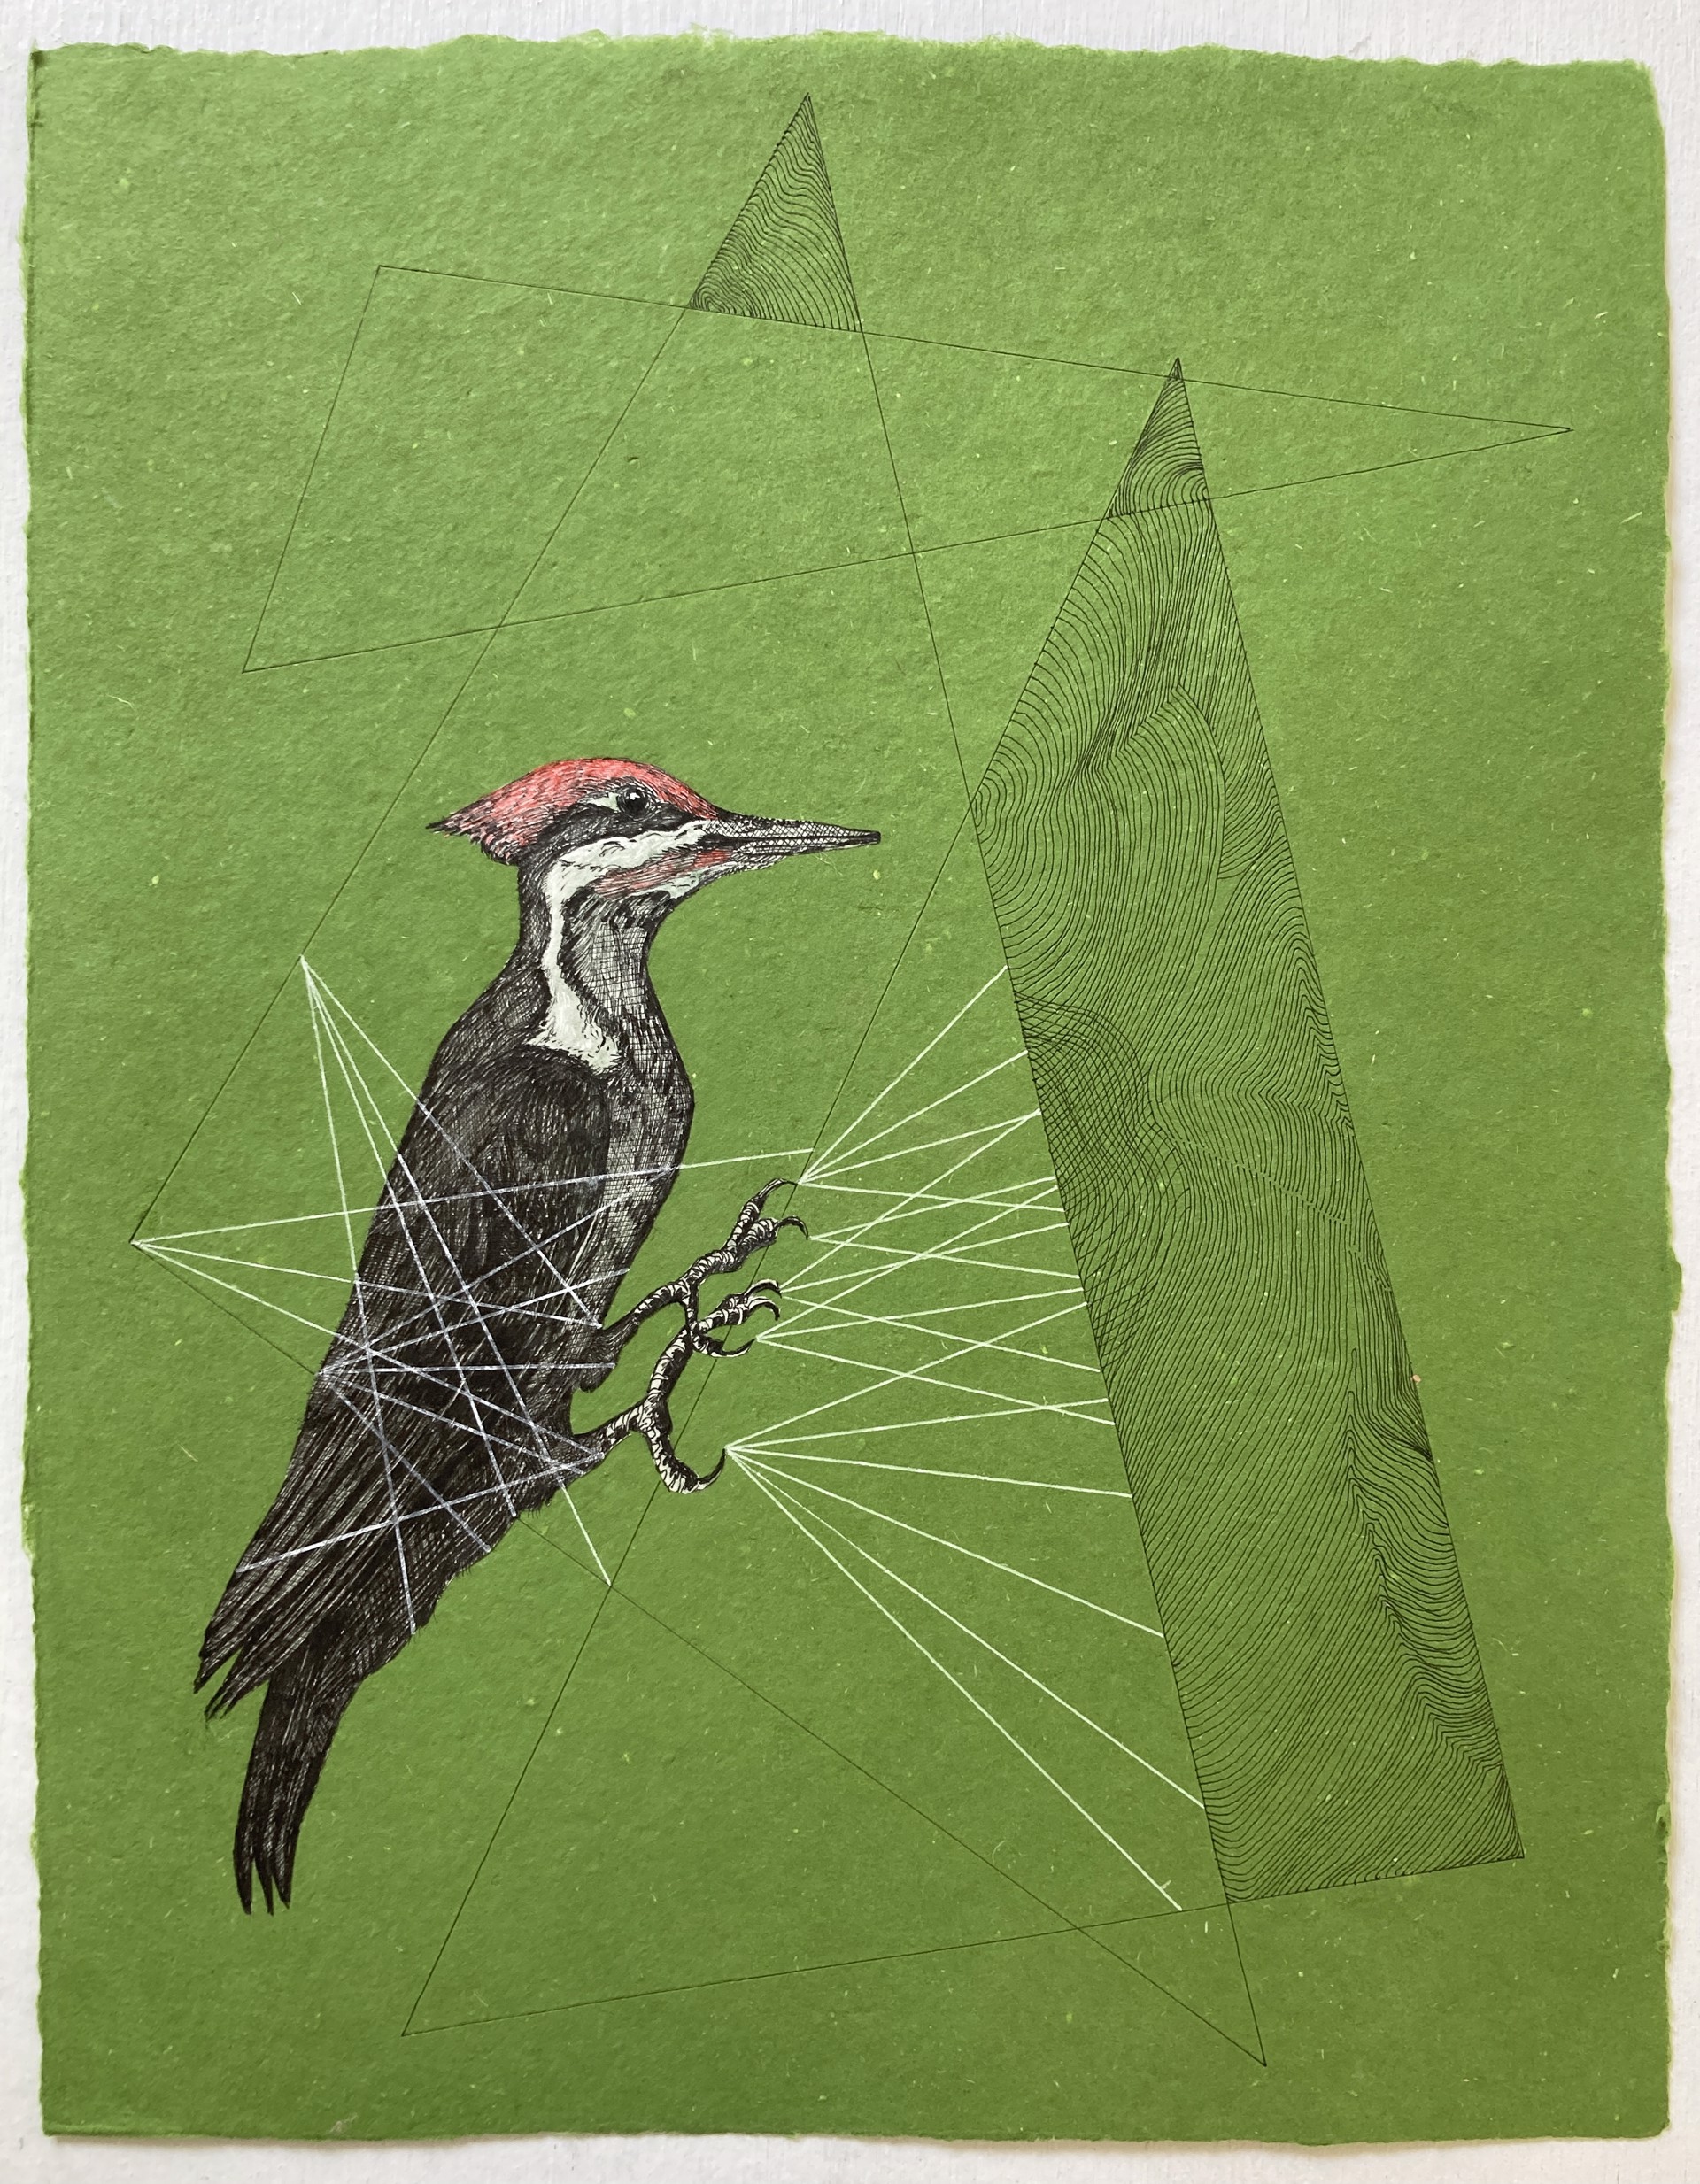 Do you see me? Pileated Woodpecker by Kirsten Furlong